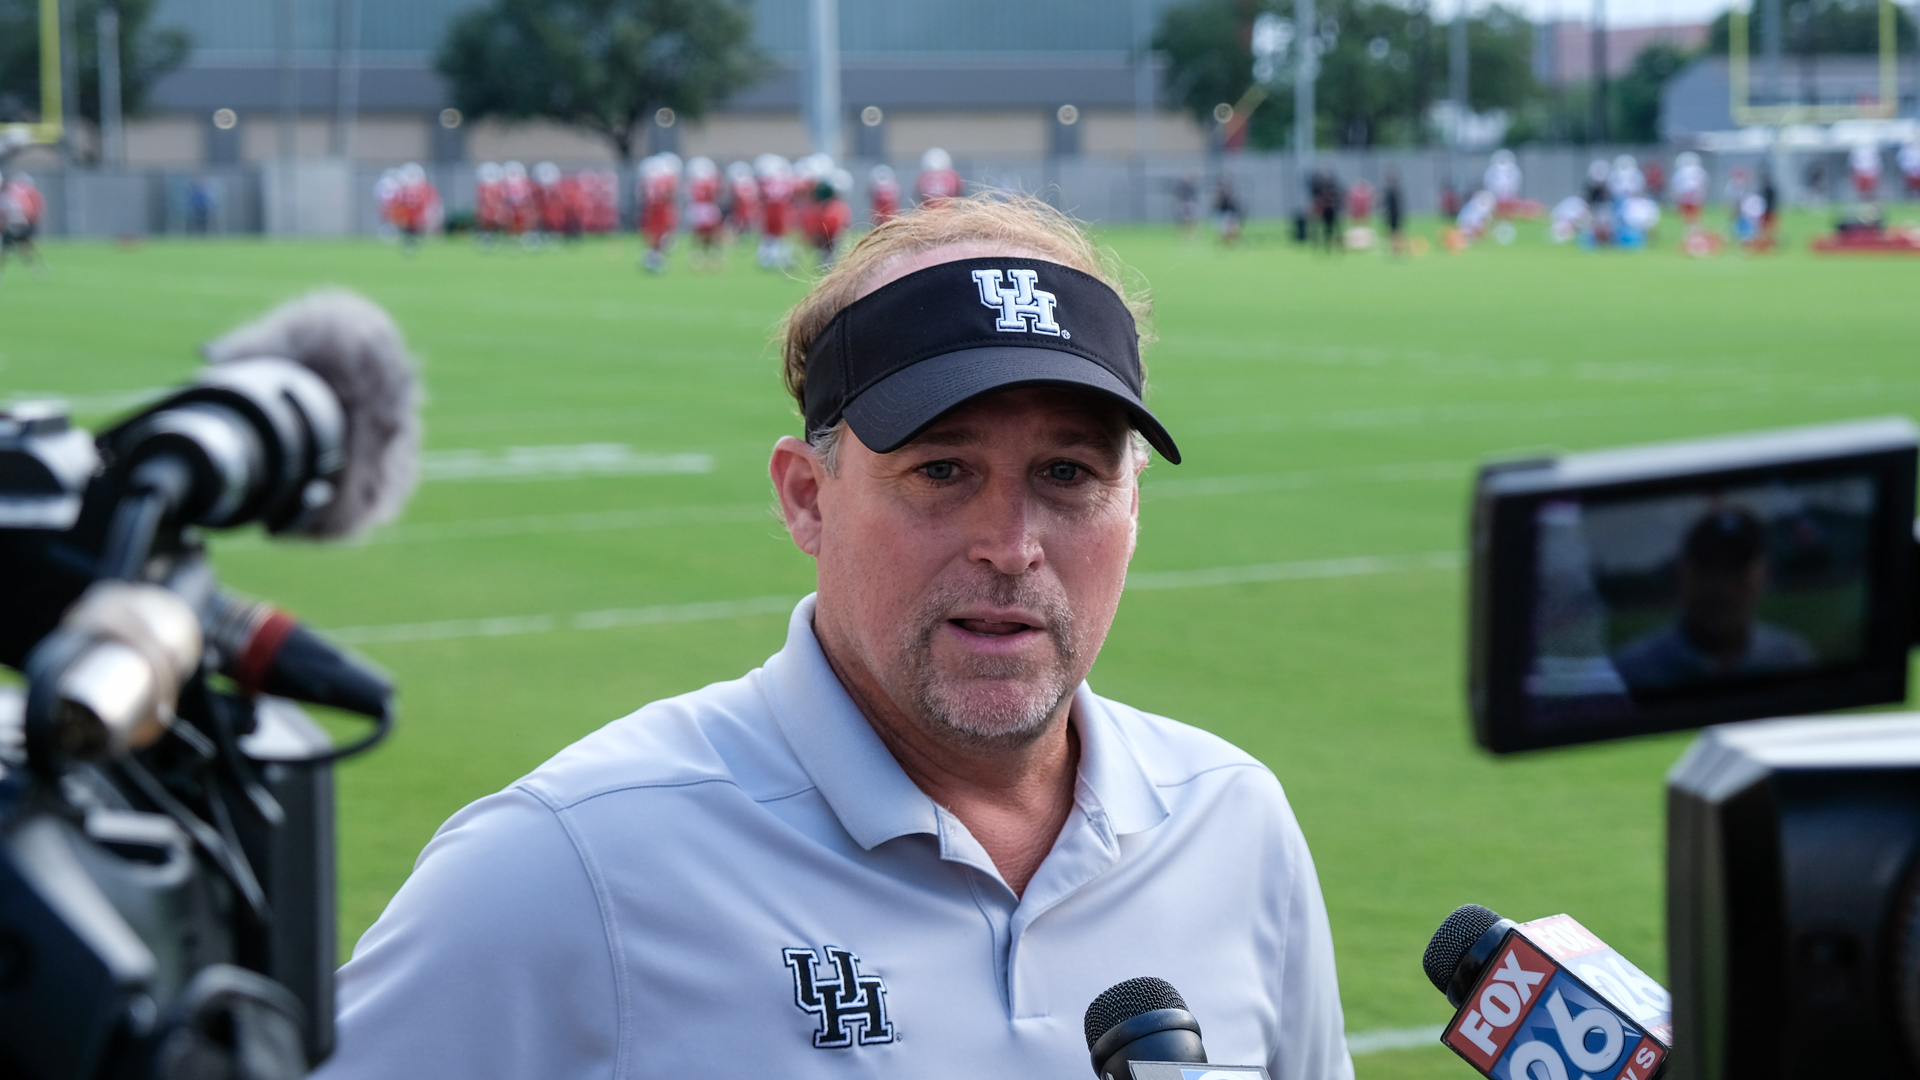 UH football coach Dana Holgorsen meeting with media in August 2019. "We had Zoom calls and stuff, but without being face-to-face or stuff, it was hard," Holgorsen told media via Zoom on Wednesday about challenges communicating with players this year due to the pandemic. | Kathryn Lenihan/The Cougar